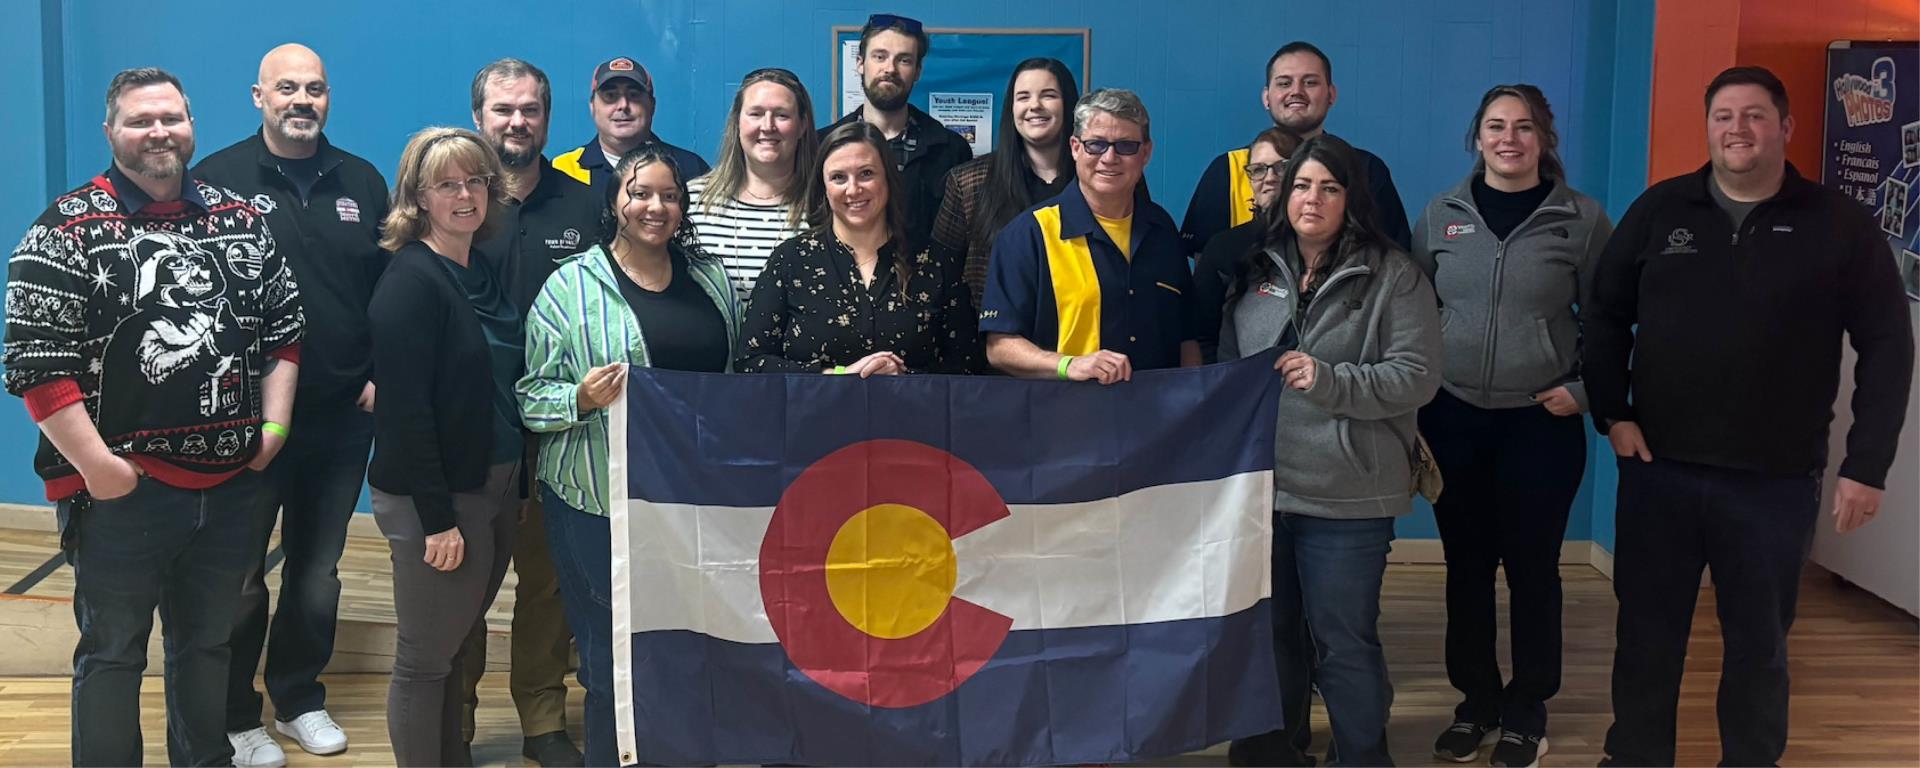 Photo of dispatch employees holding Colorado state flag after earning award